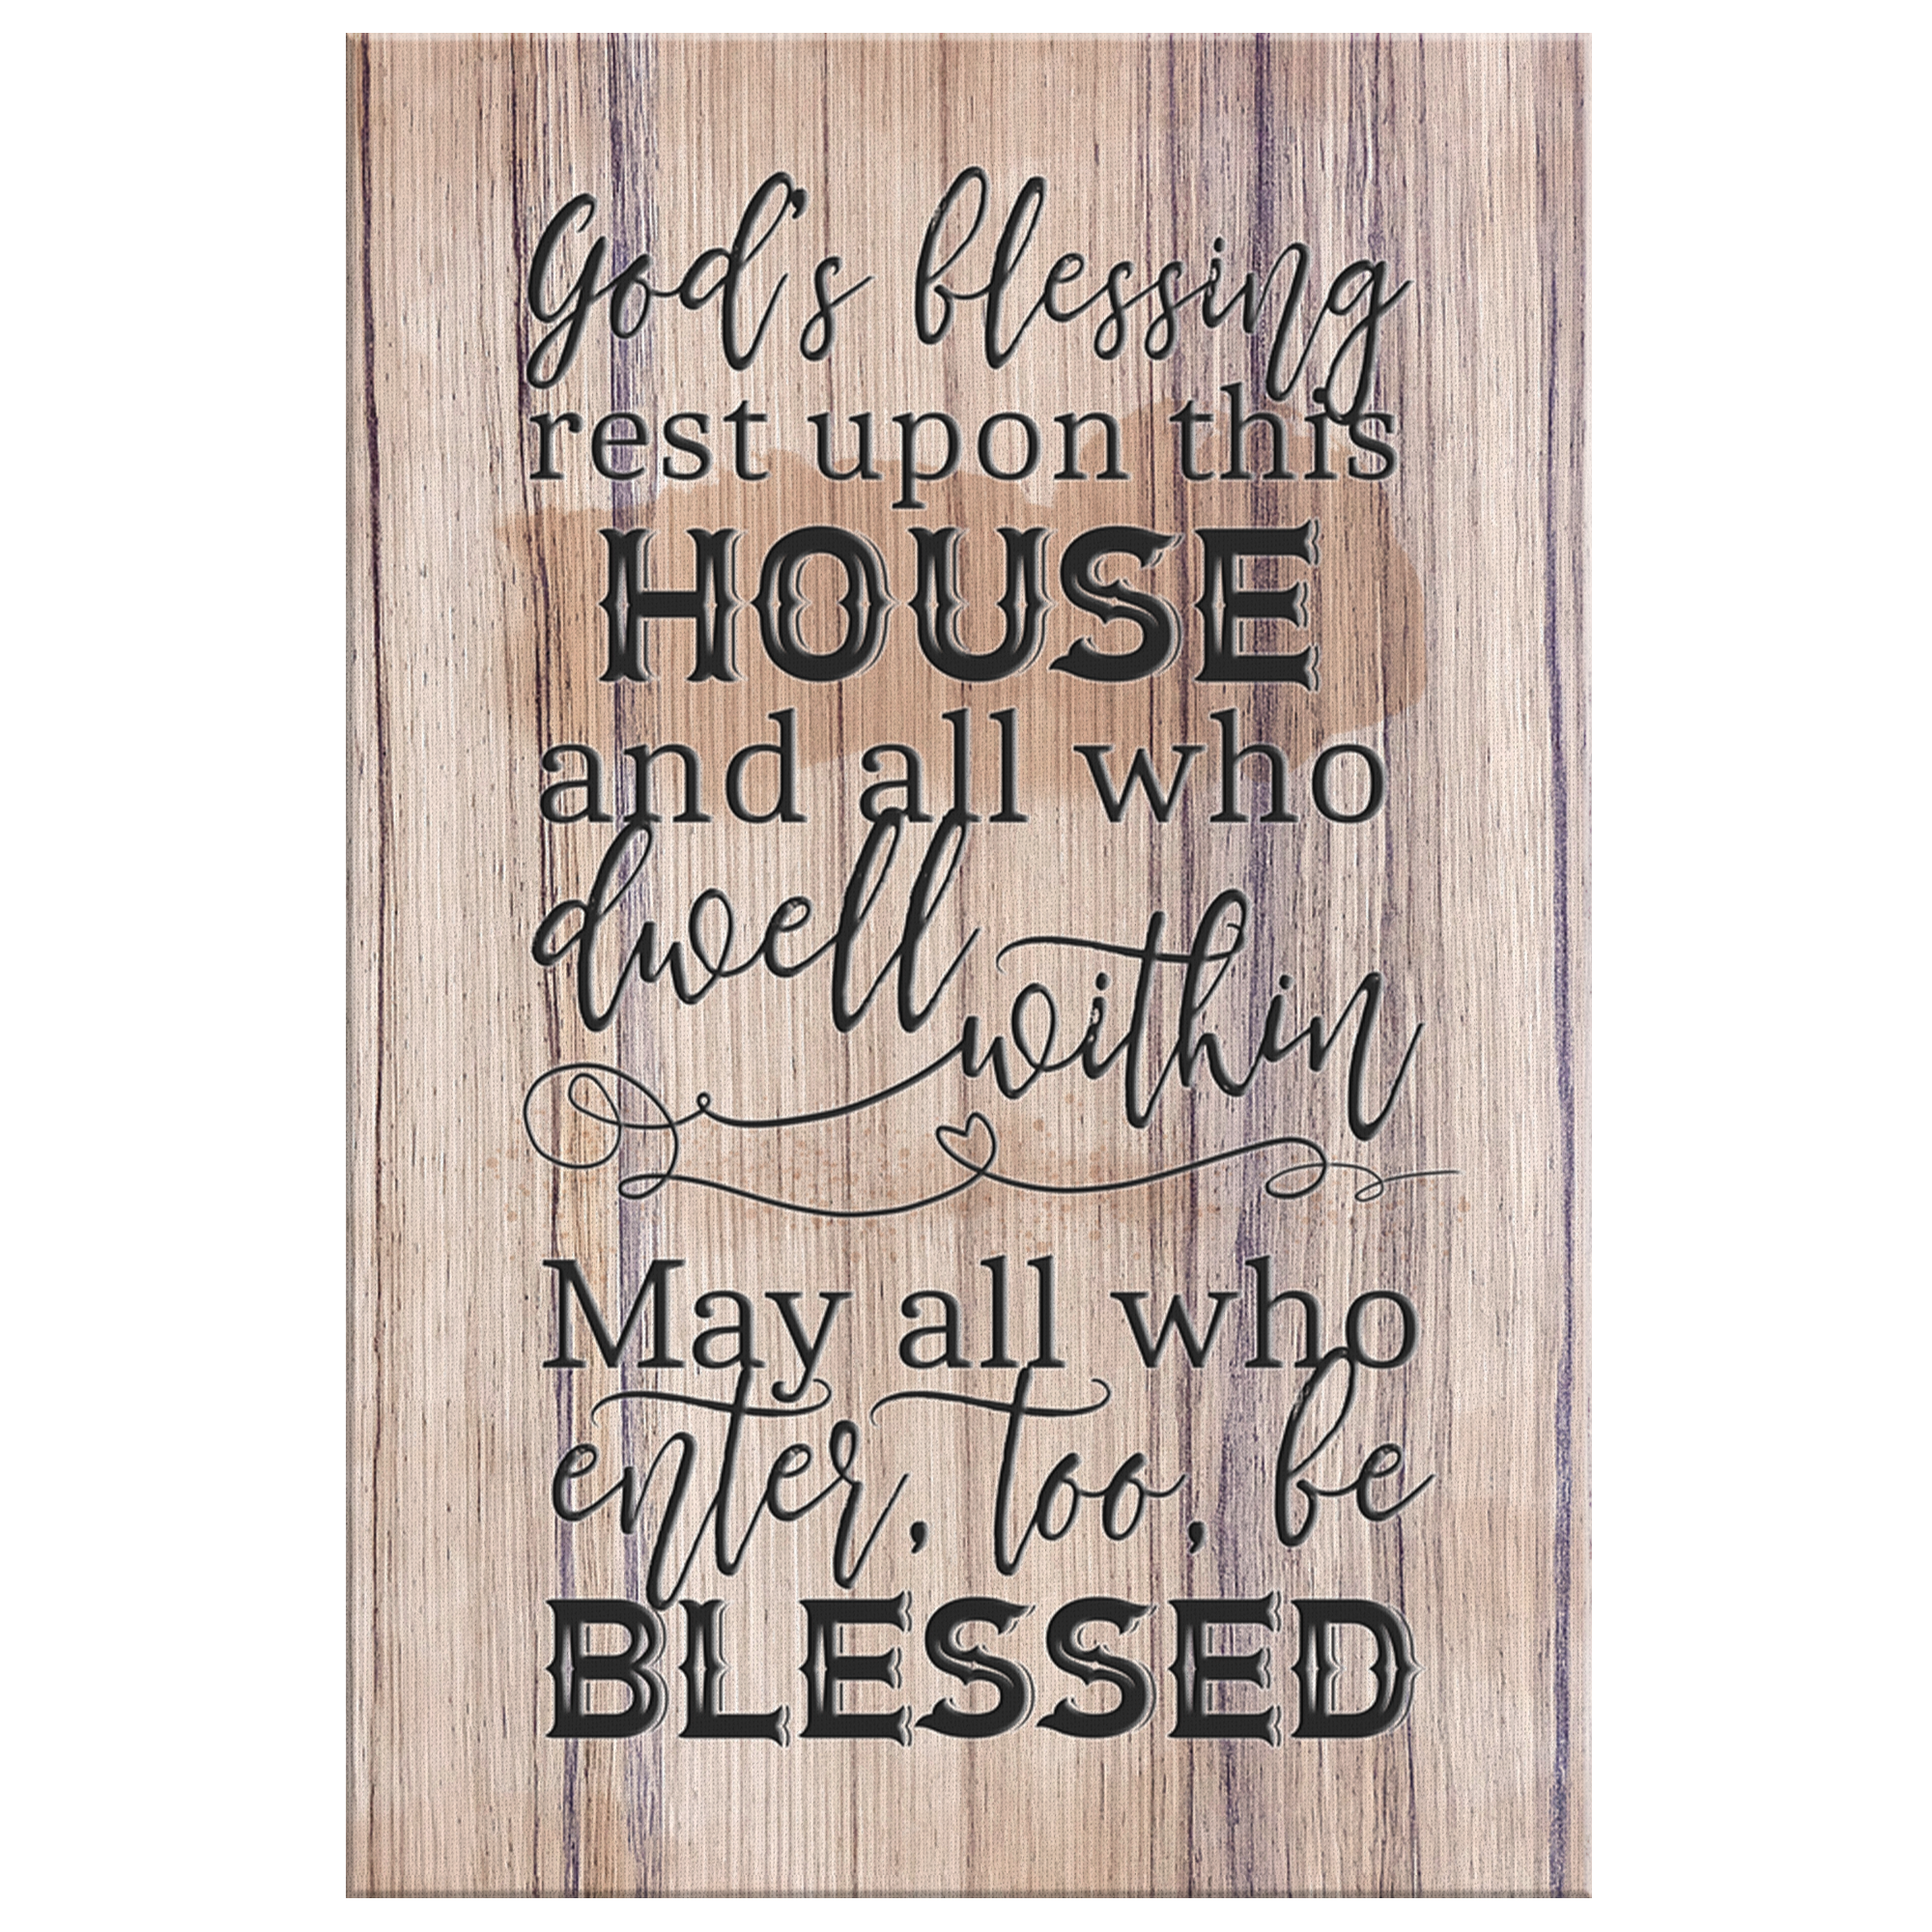 "God's Blessing Rest Upon This House" Premium Canvas Wall Art